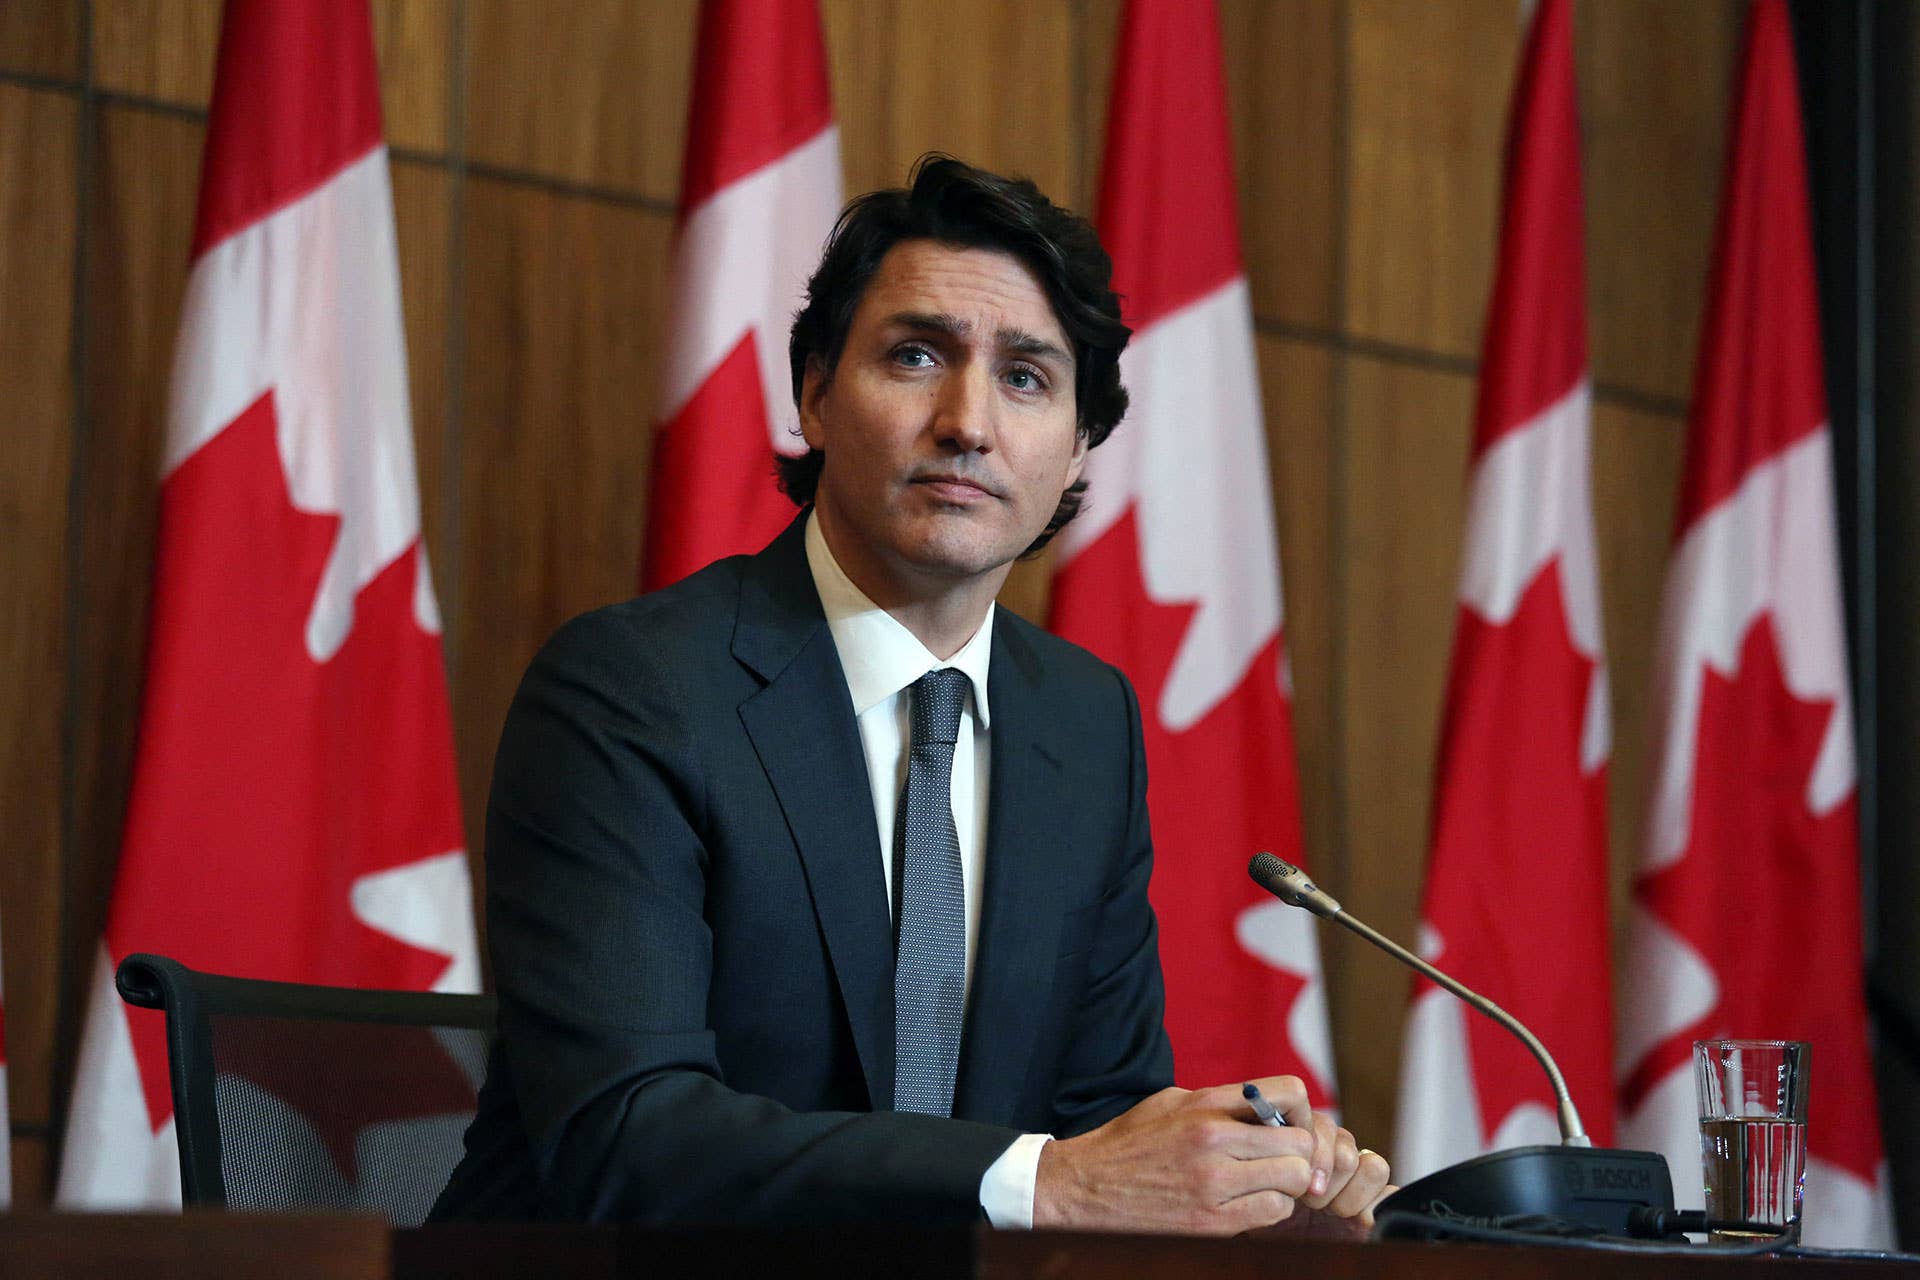 Canada's Prime Minister Justin Trudeau speaks at a news conference